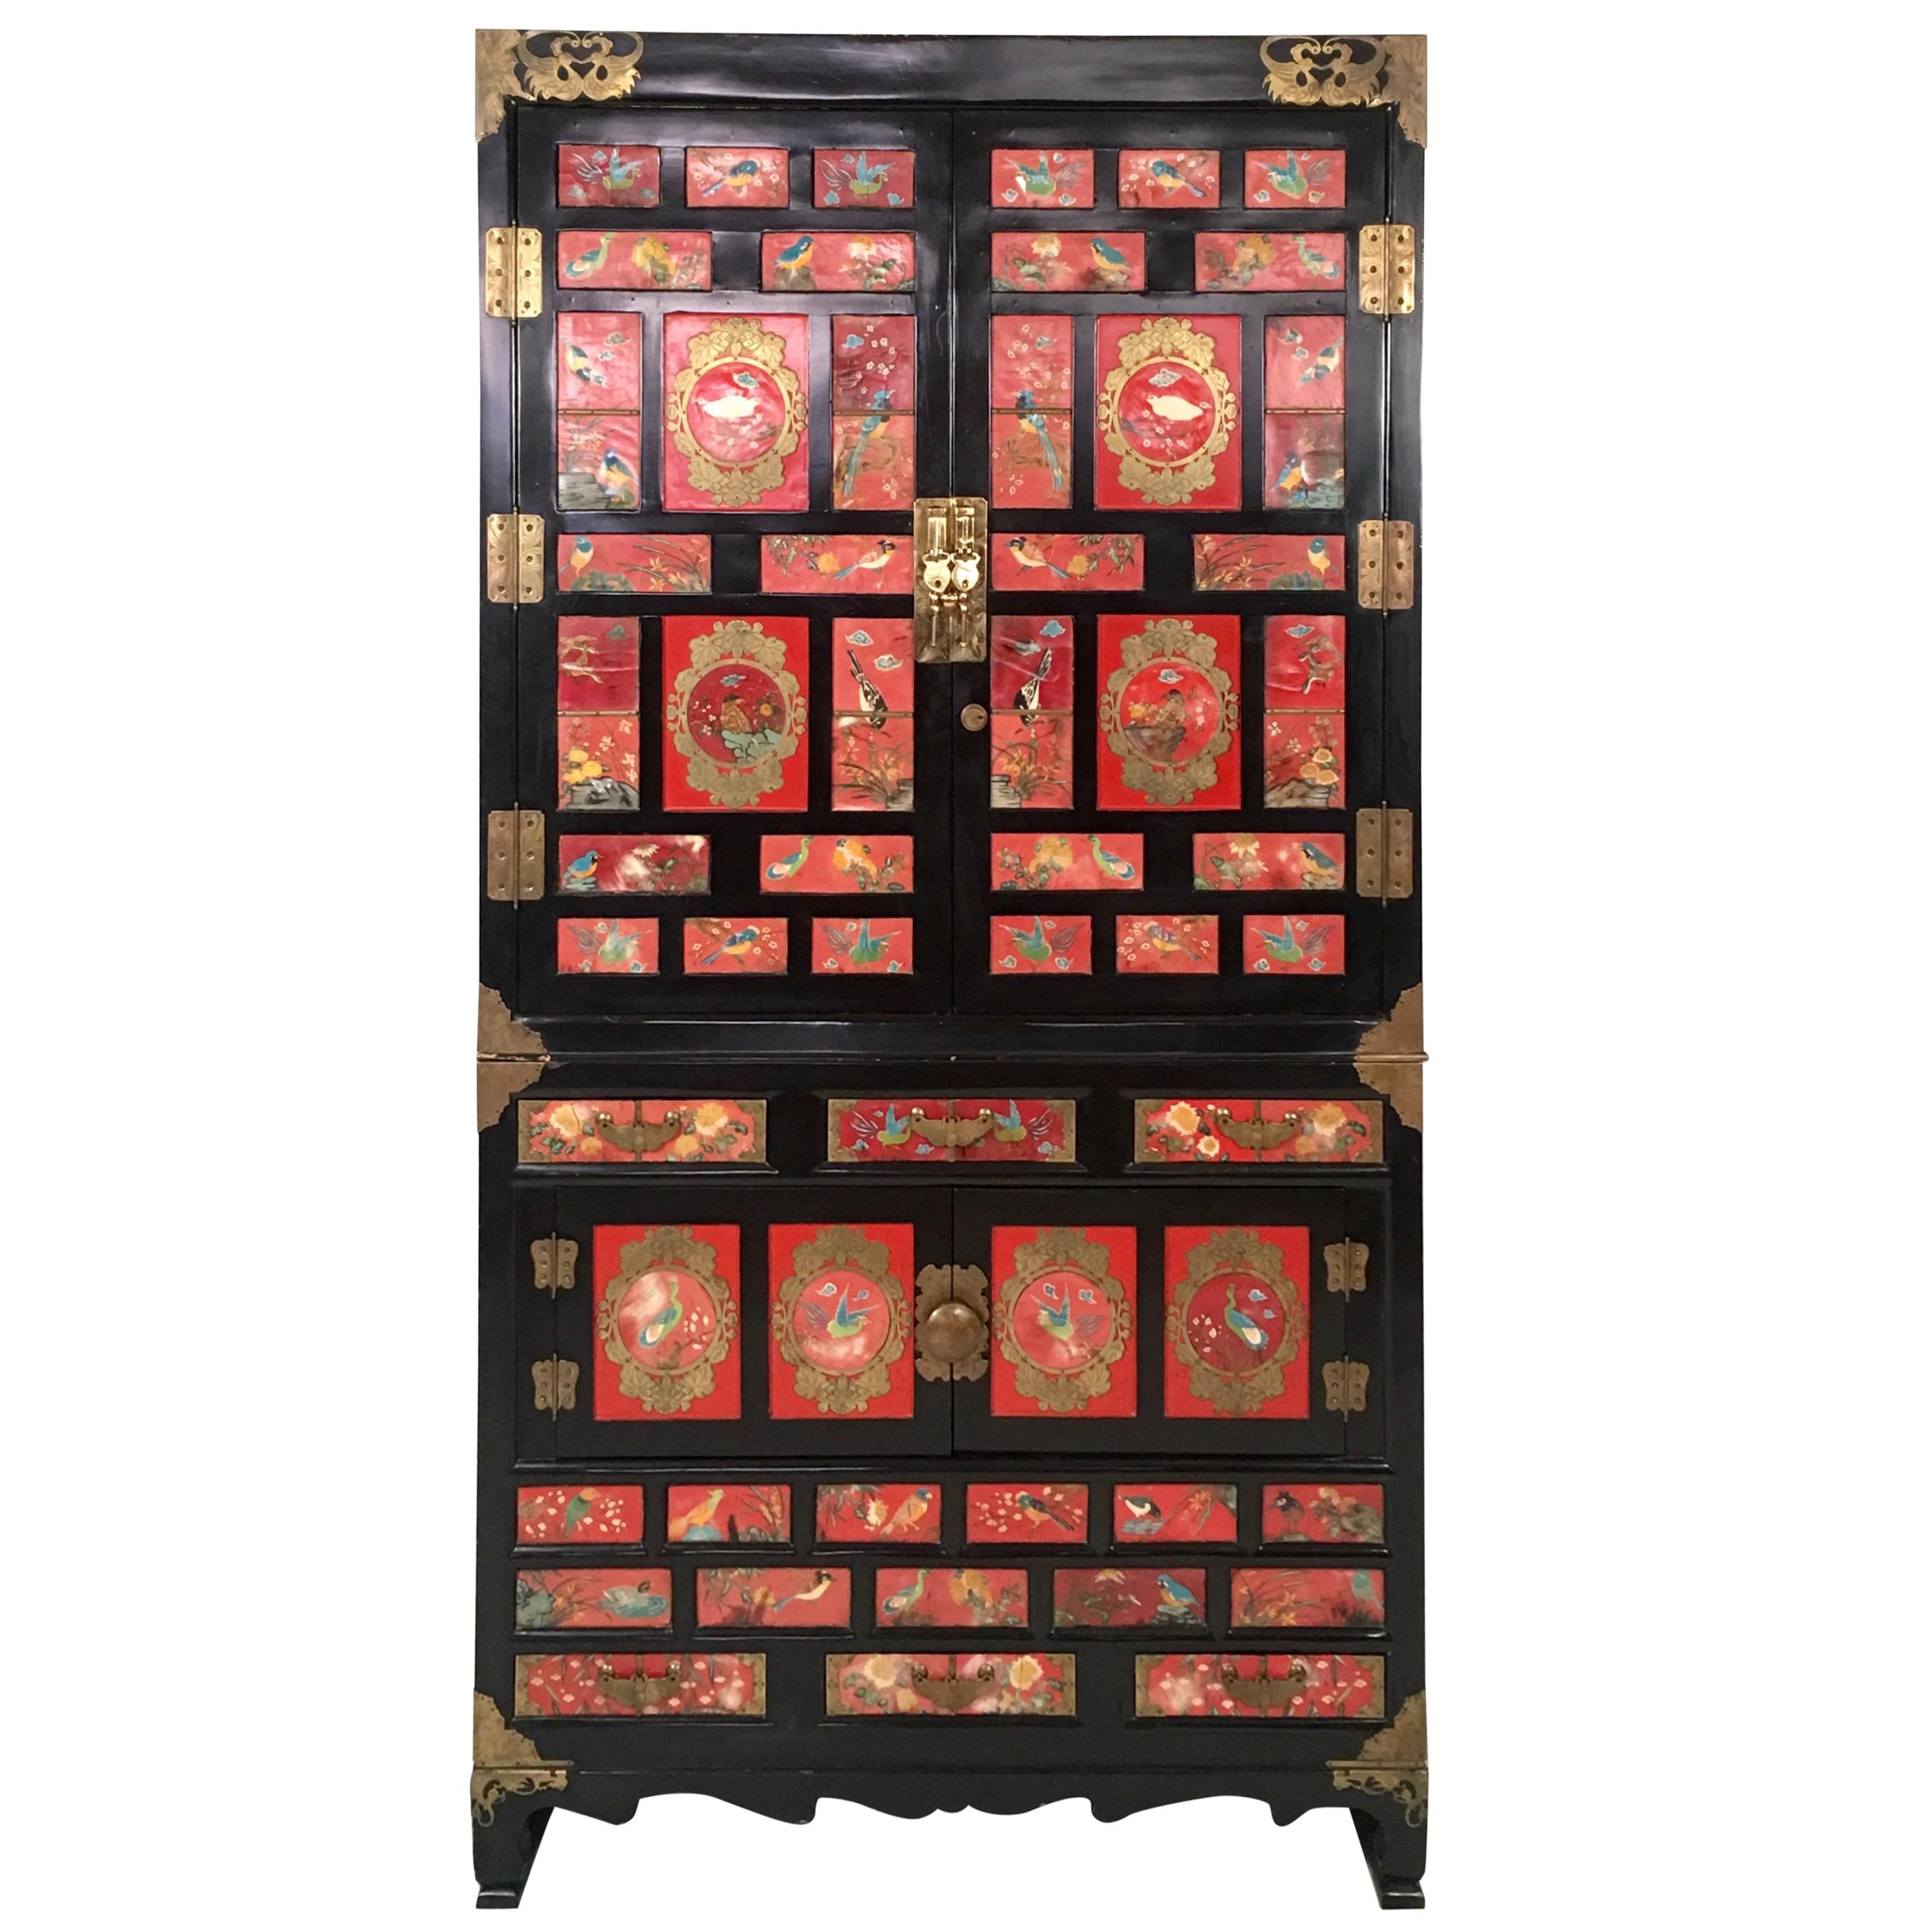 Chinese Export Lacquered Cabinet with Hand-Painted Bird Decorated Panels